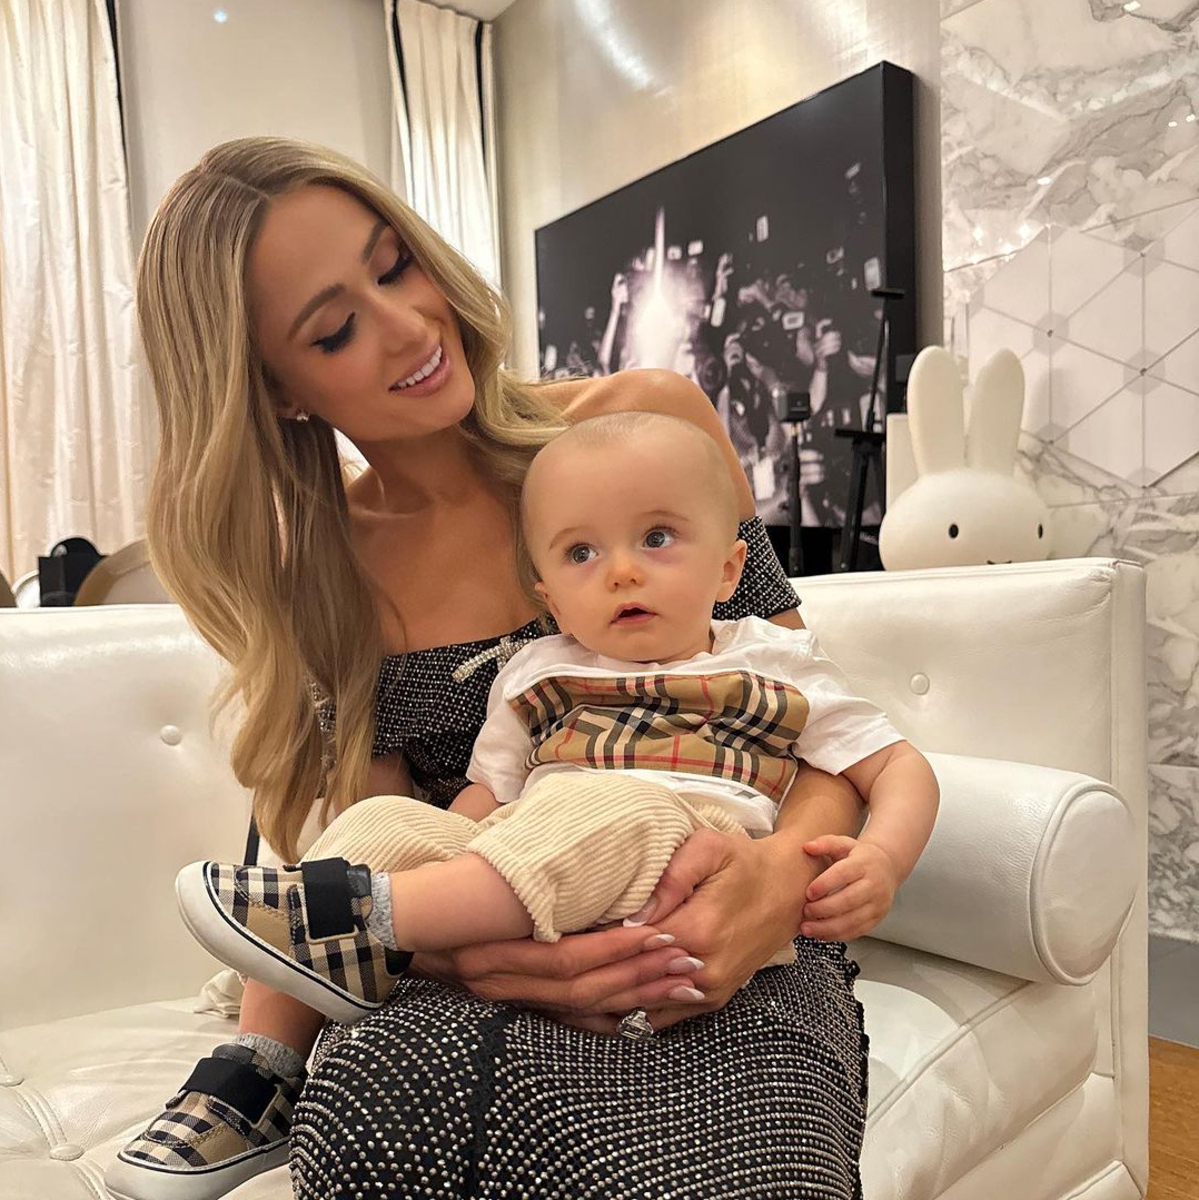 Why Paris Hilton Hit Back at Negative Comments About Her Son